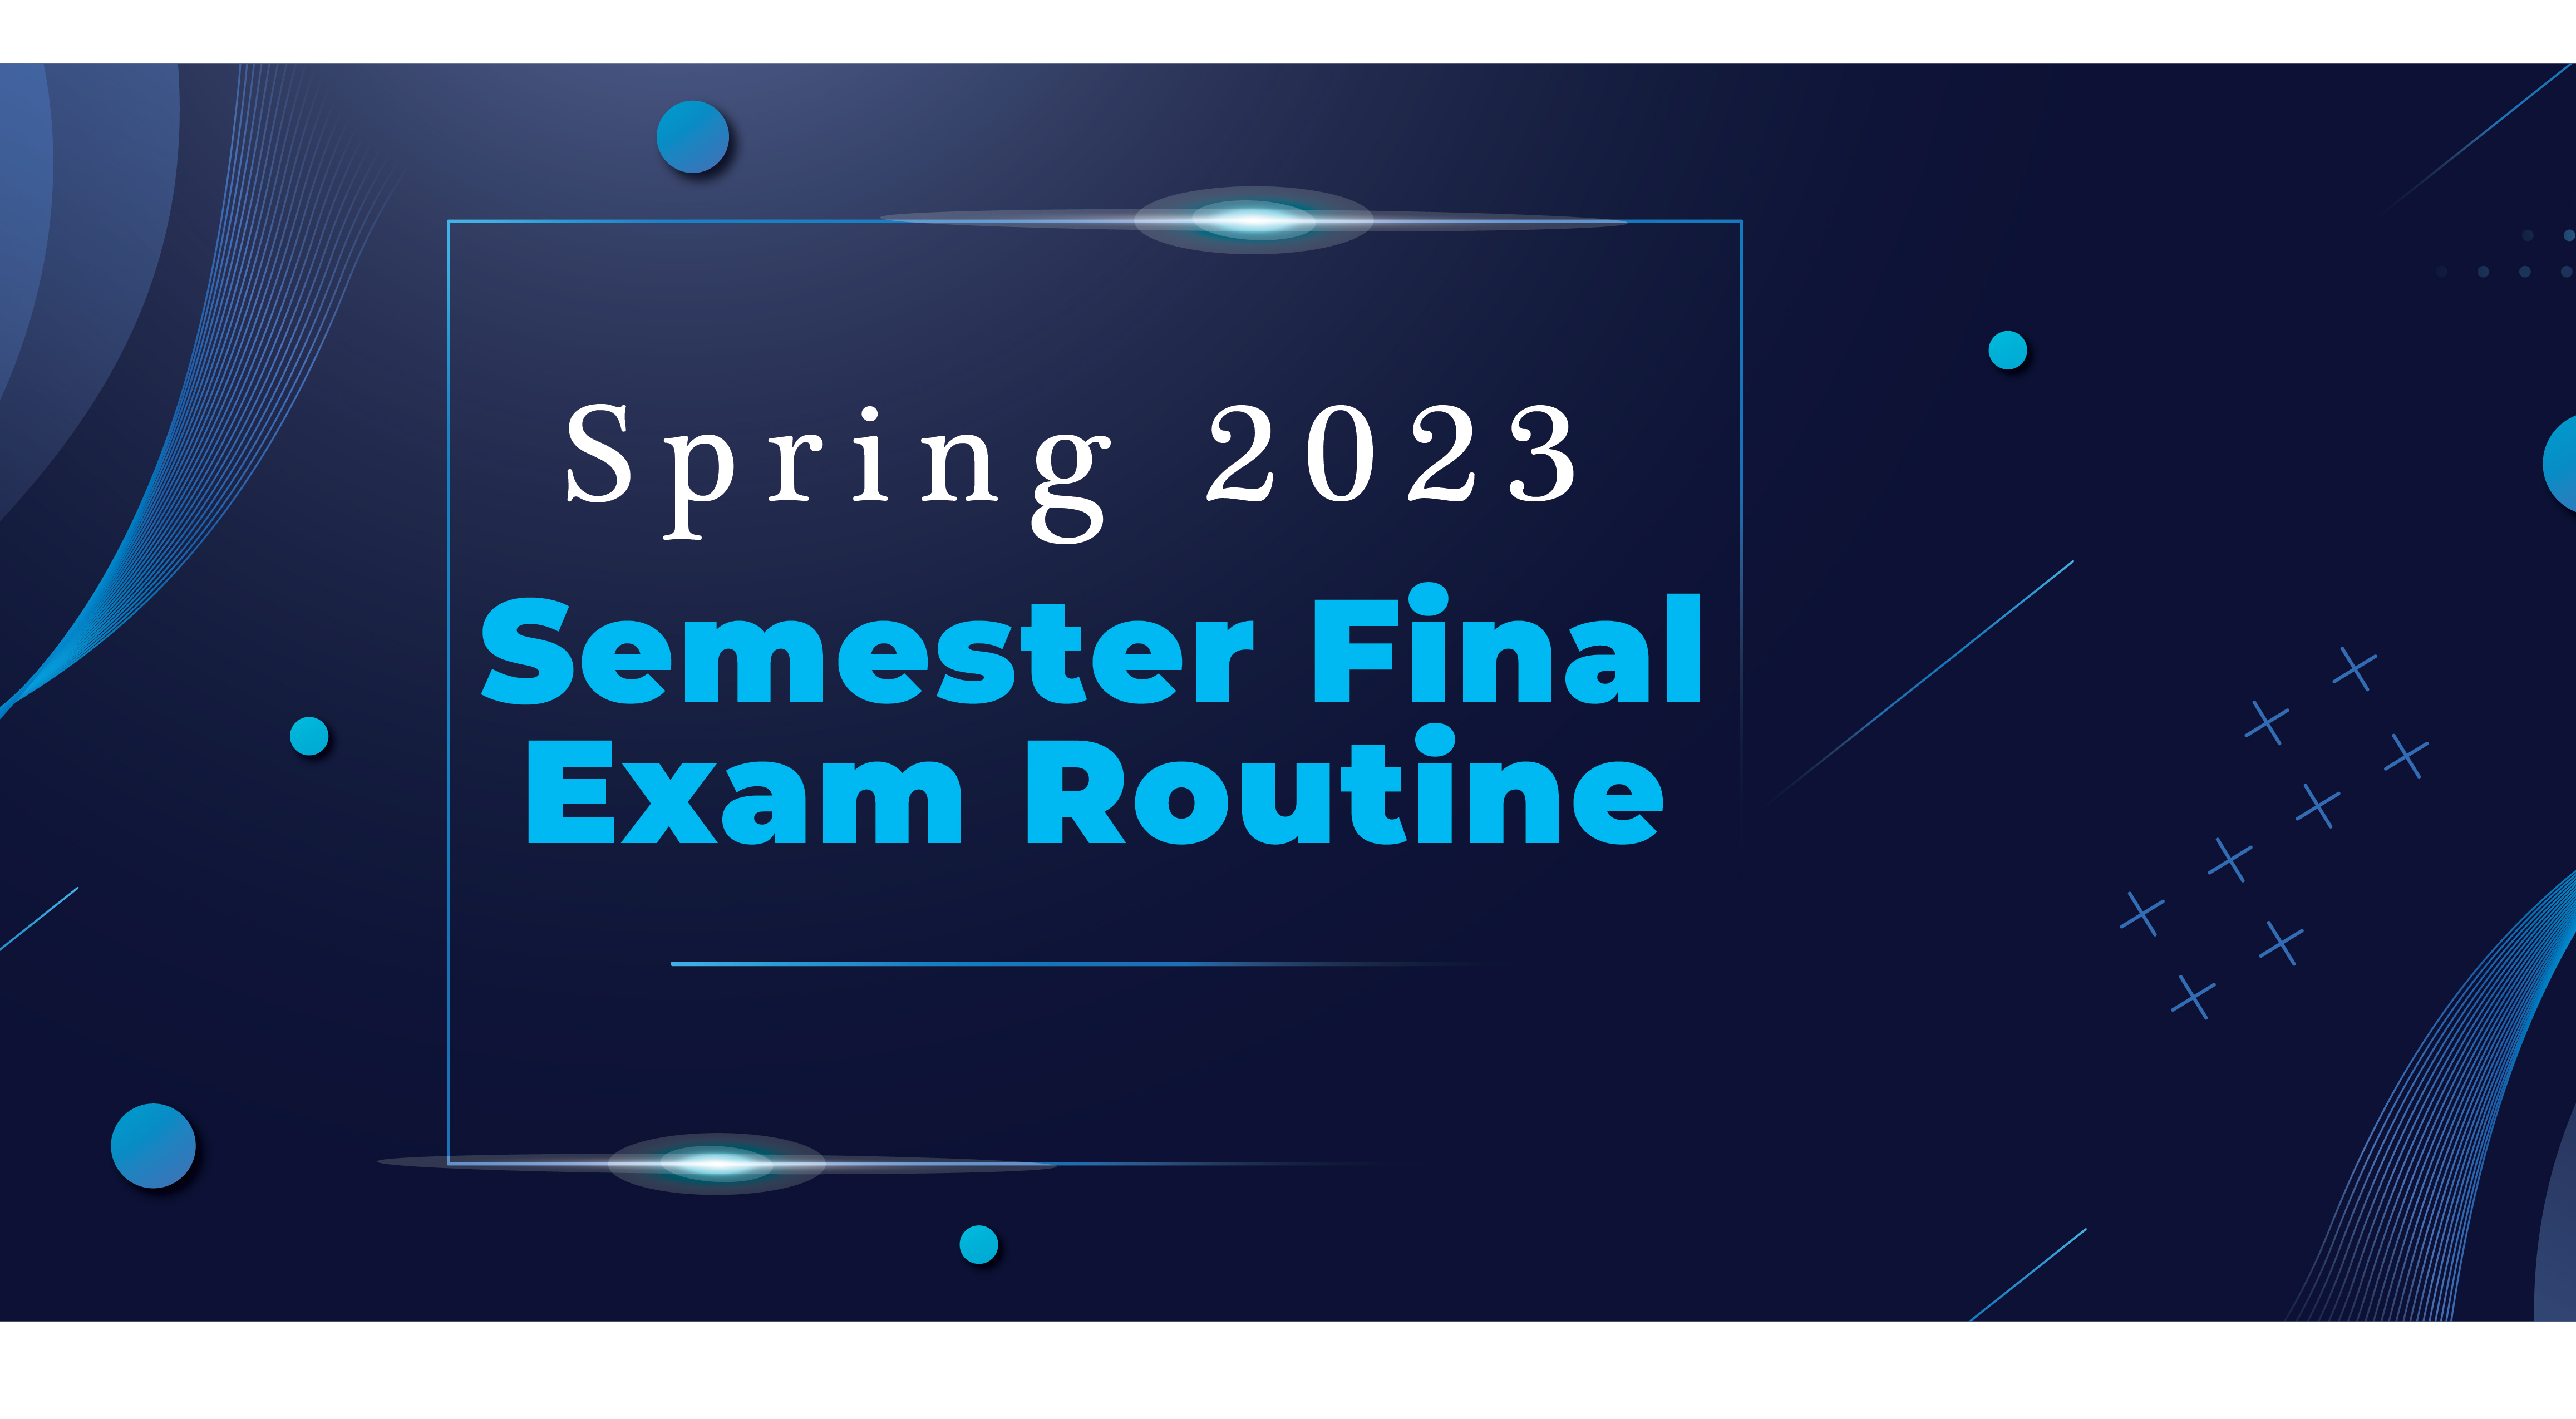 SPRING 2023 SEMESTER FINAL EXAM ROUTINE FOR ISLAMIC HISTORY & CIVILIZATION